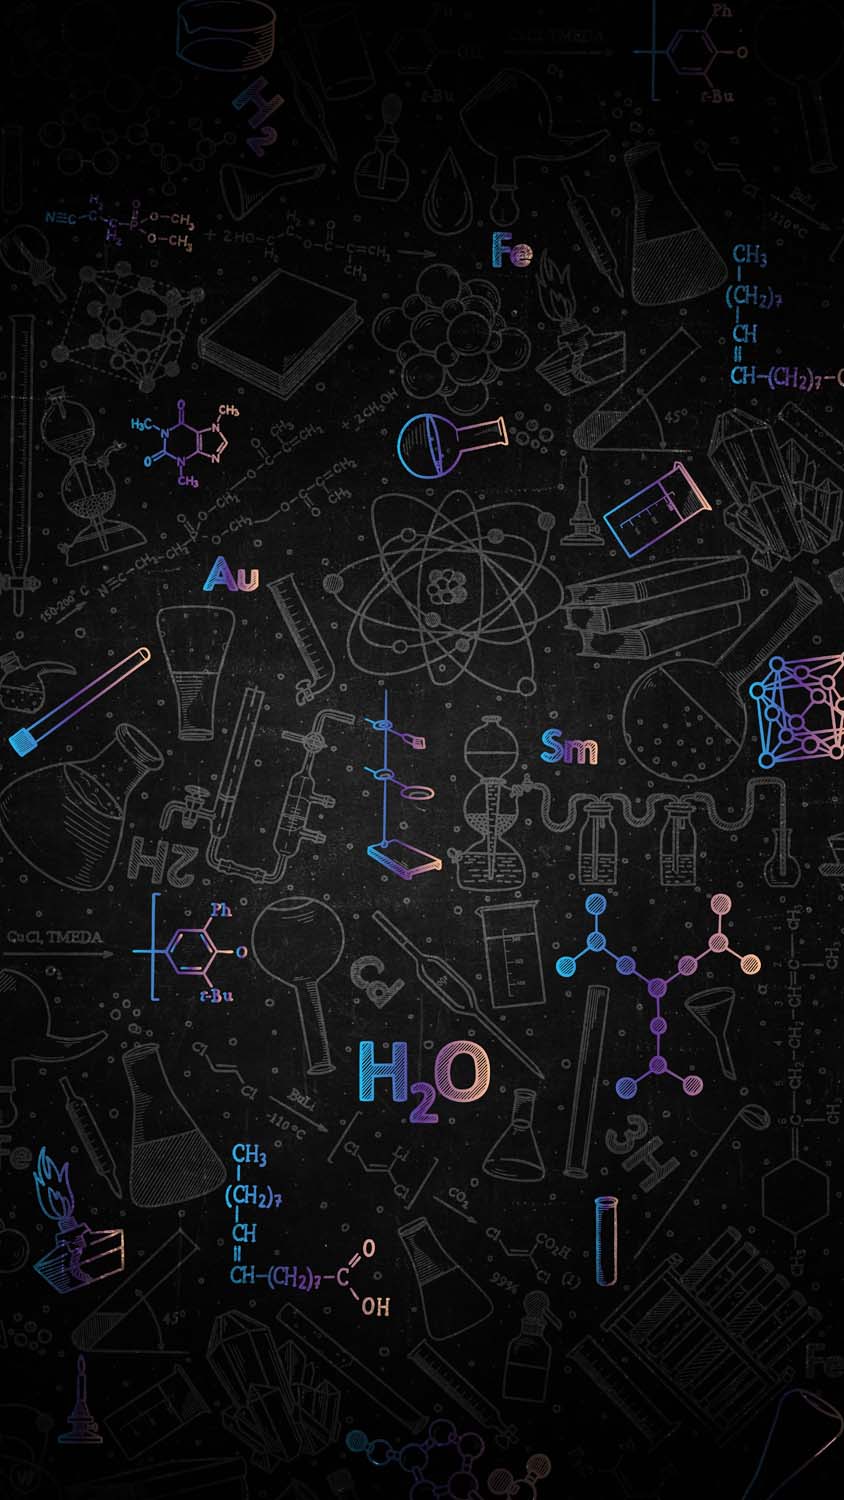 Chemistry Lab IPhone Wallpaper HD - IPhone Wallpapers : iPhone Wallpapers